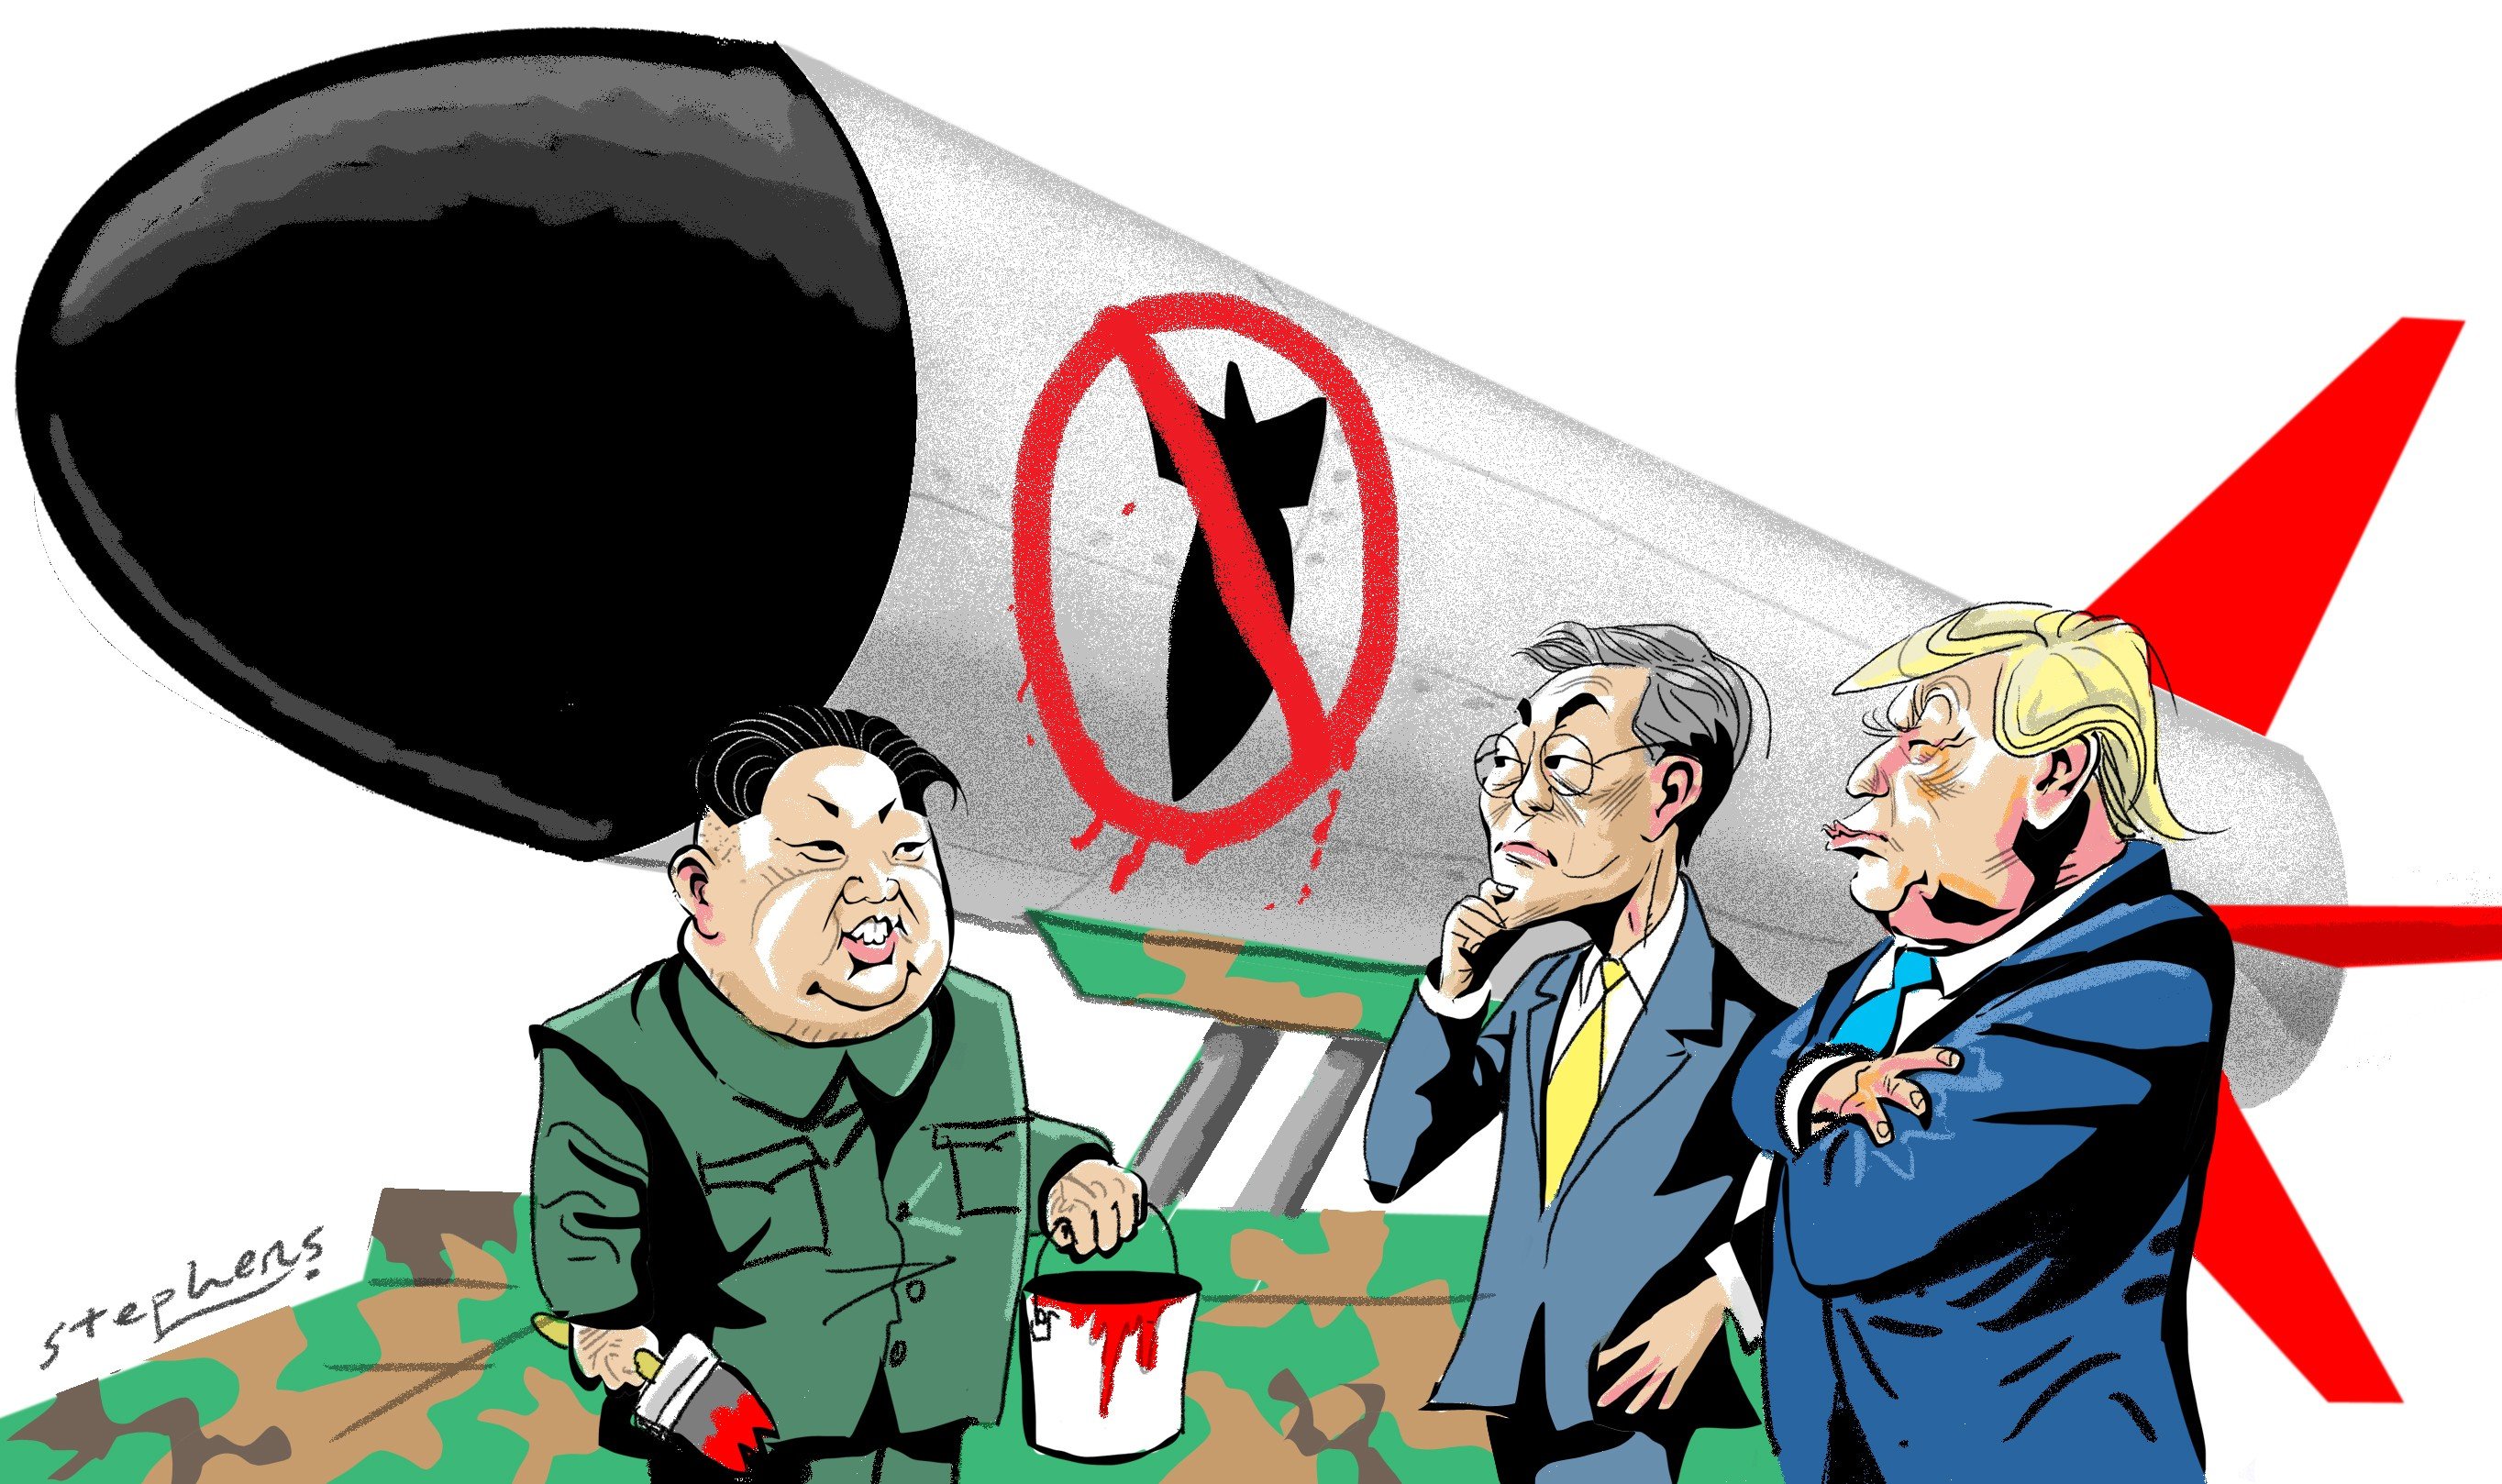 Kim Jong-un may be putting on a show of agreeing to denuclearisation efforts to lift sanctions and ease international pressure on North Korea. llustration: Craig Stephens